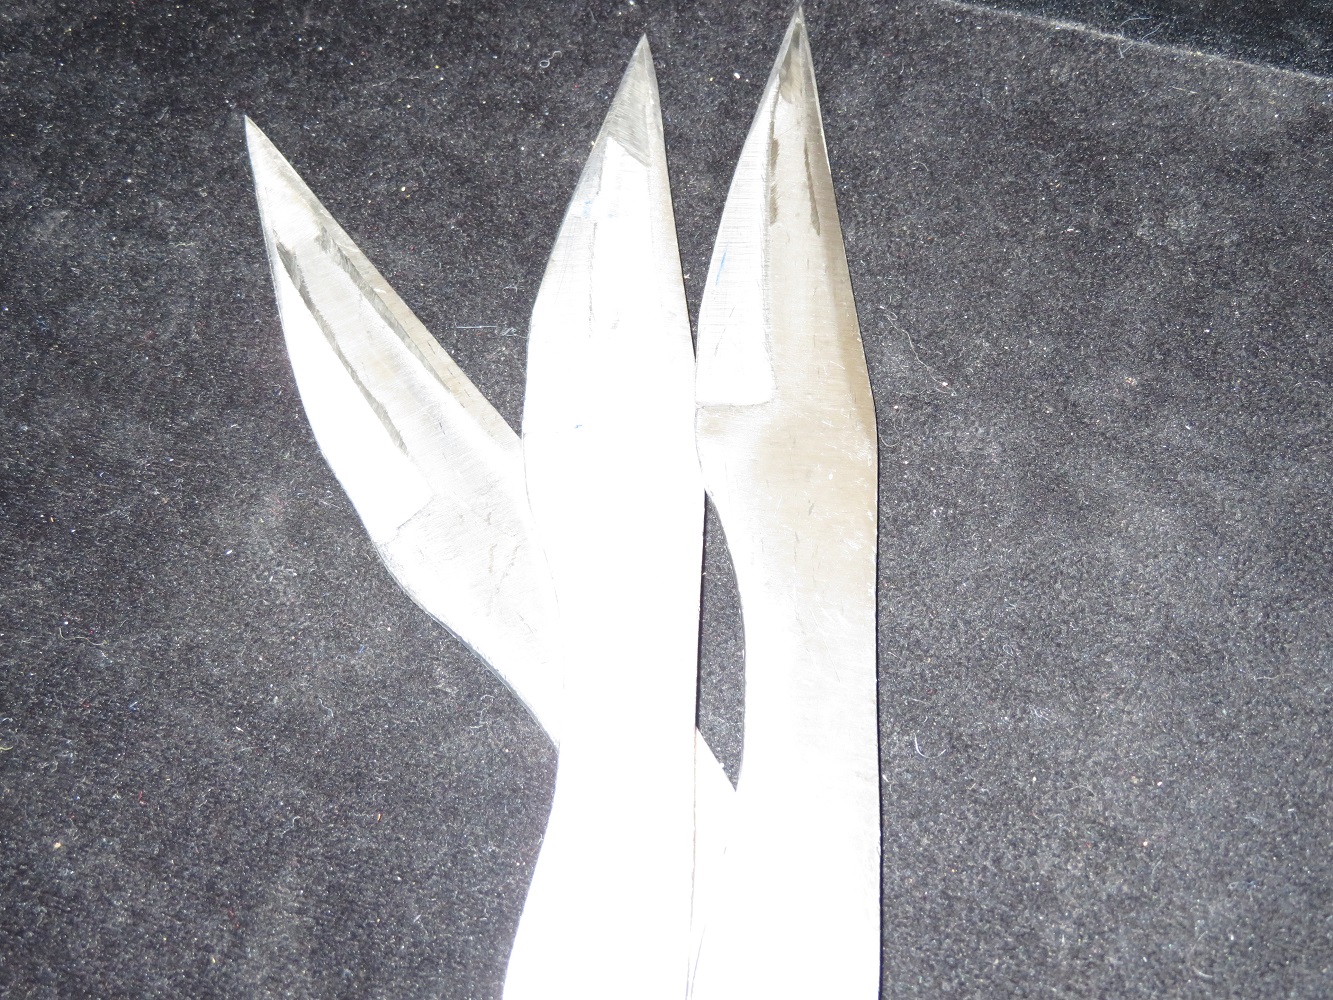 Set of 3 throwing knives